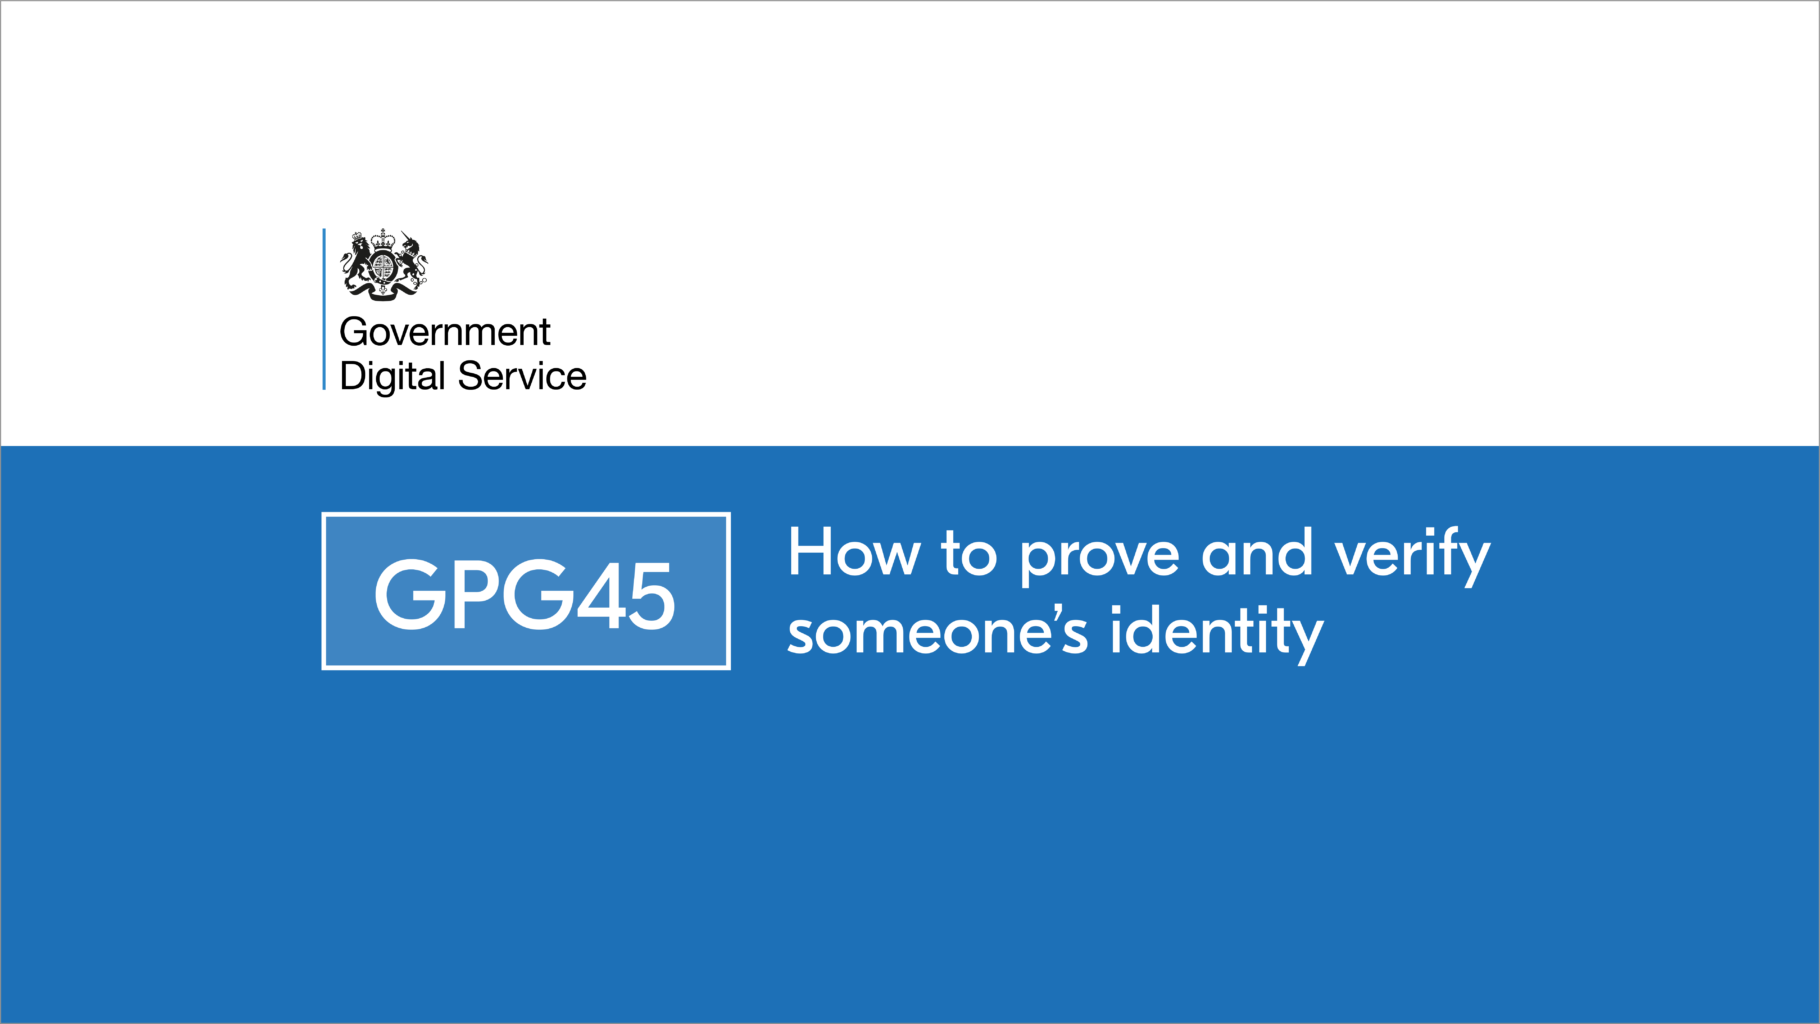 GPG 45 guidance on identity checks opens up for the private sector